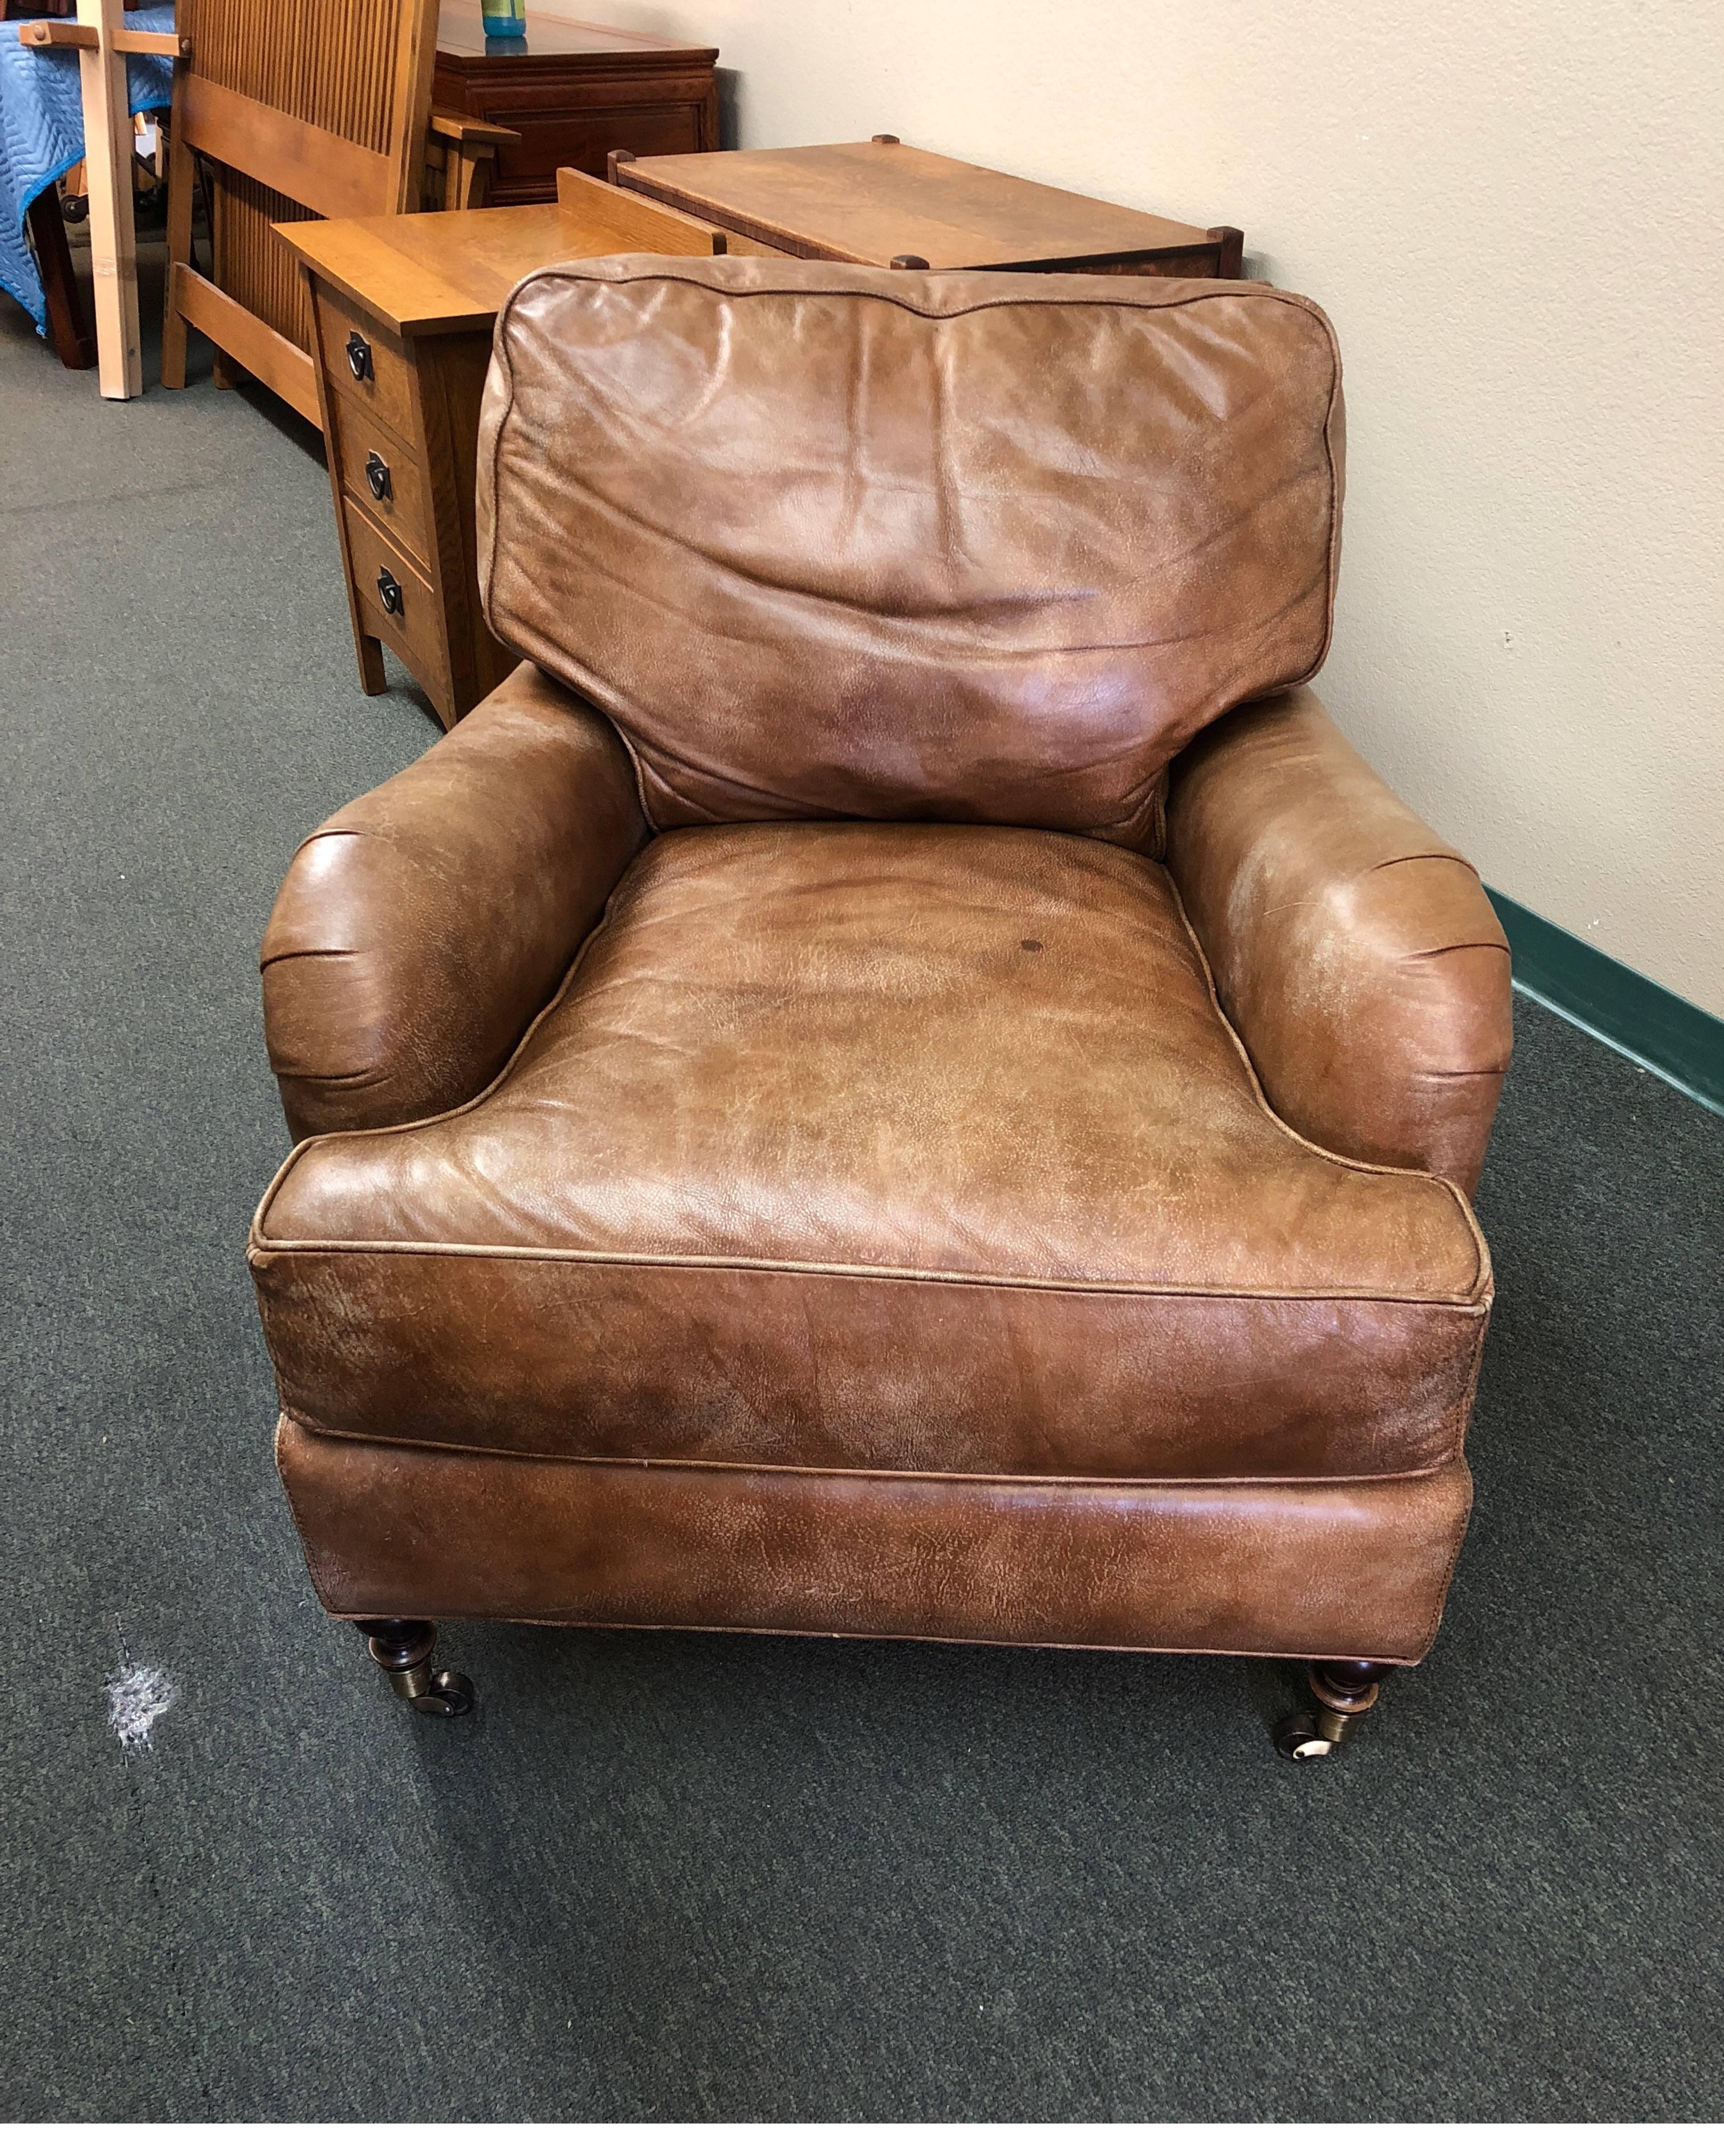 Well made armchair by Lee Industries, this worn-look leather armchair will become a favorite. Loose cushions, self welting and brass casters. Upholstered in Cambridge leather. Measures: Arm height 24 inches., seat height 19 inches.

 